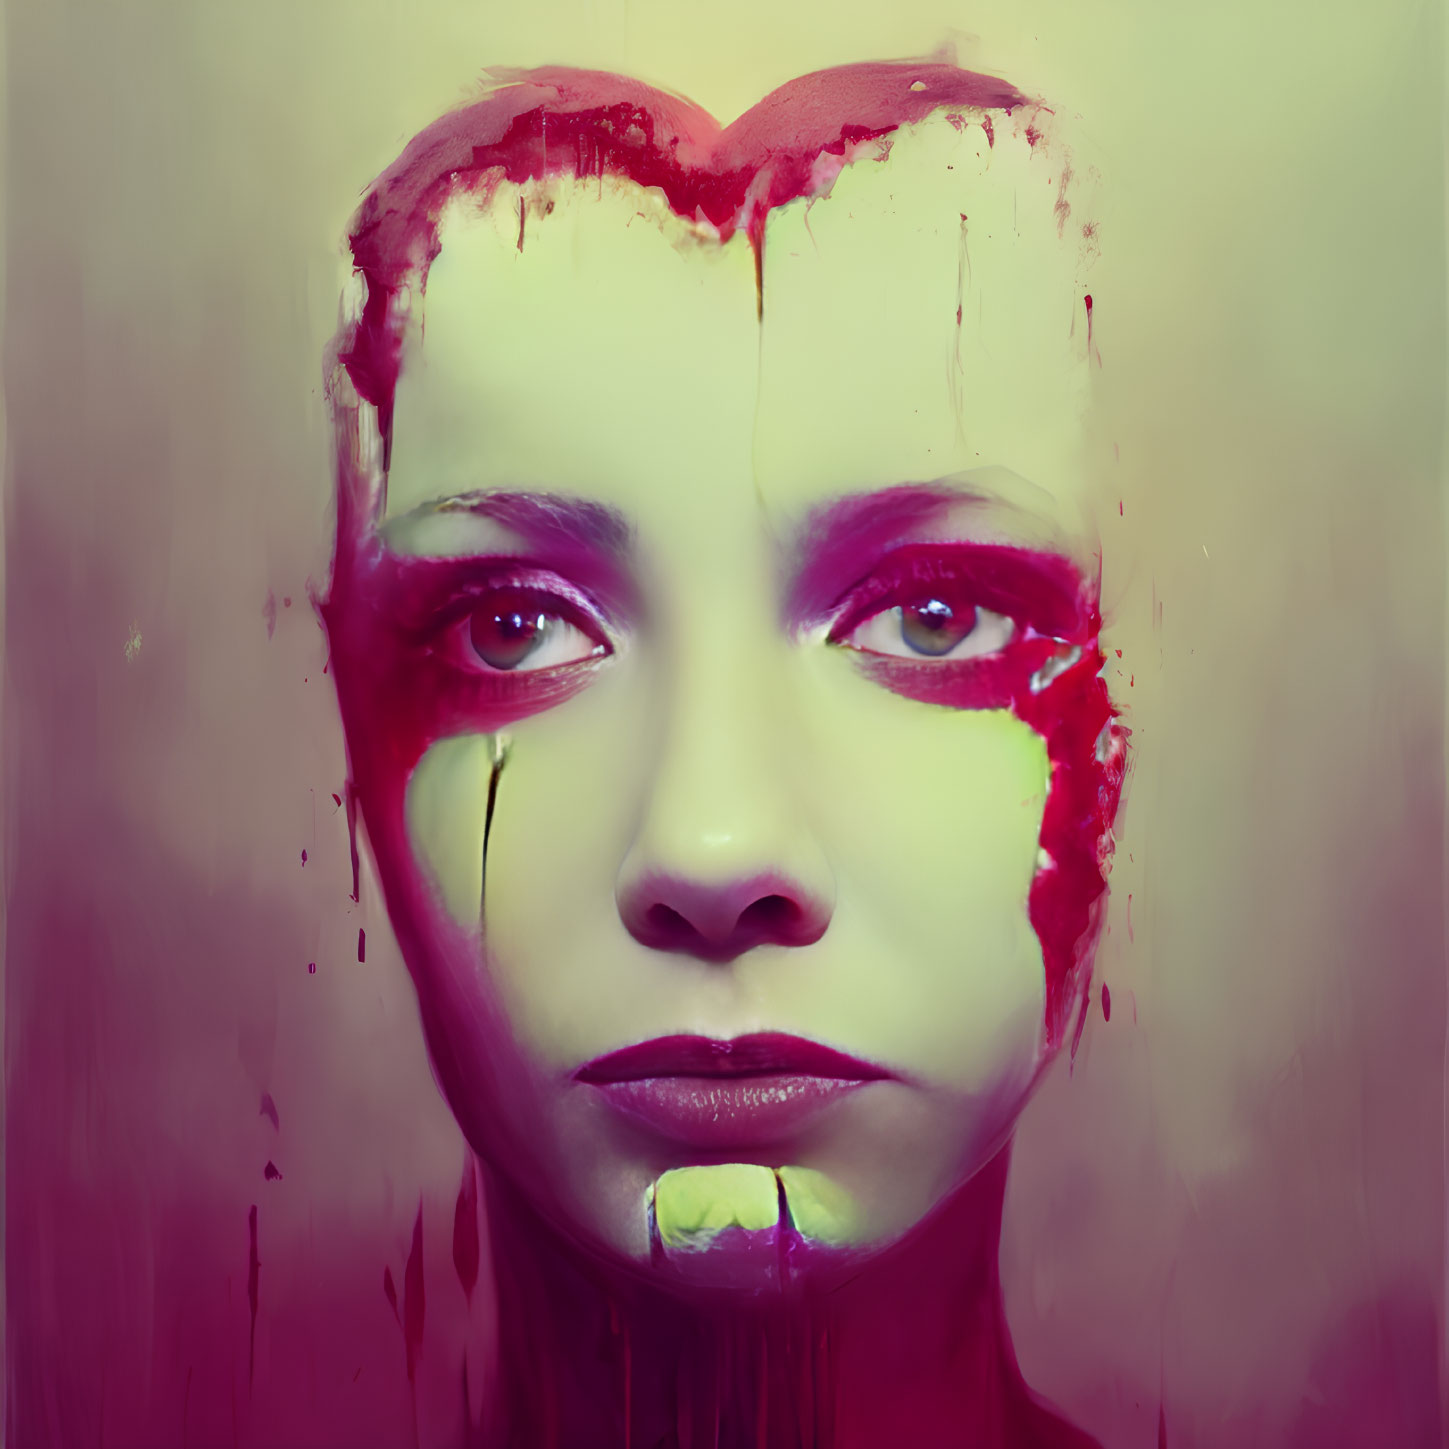 Stylized portrait with heart on forehead, red and yellow paint drips on face.